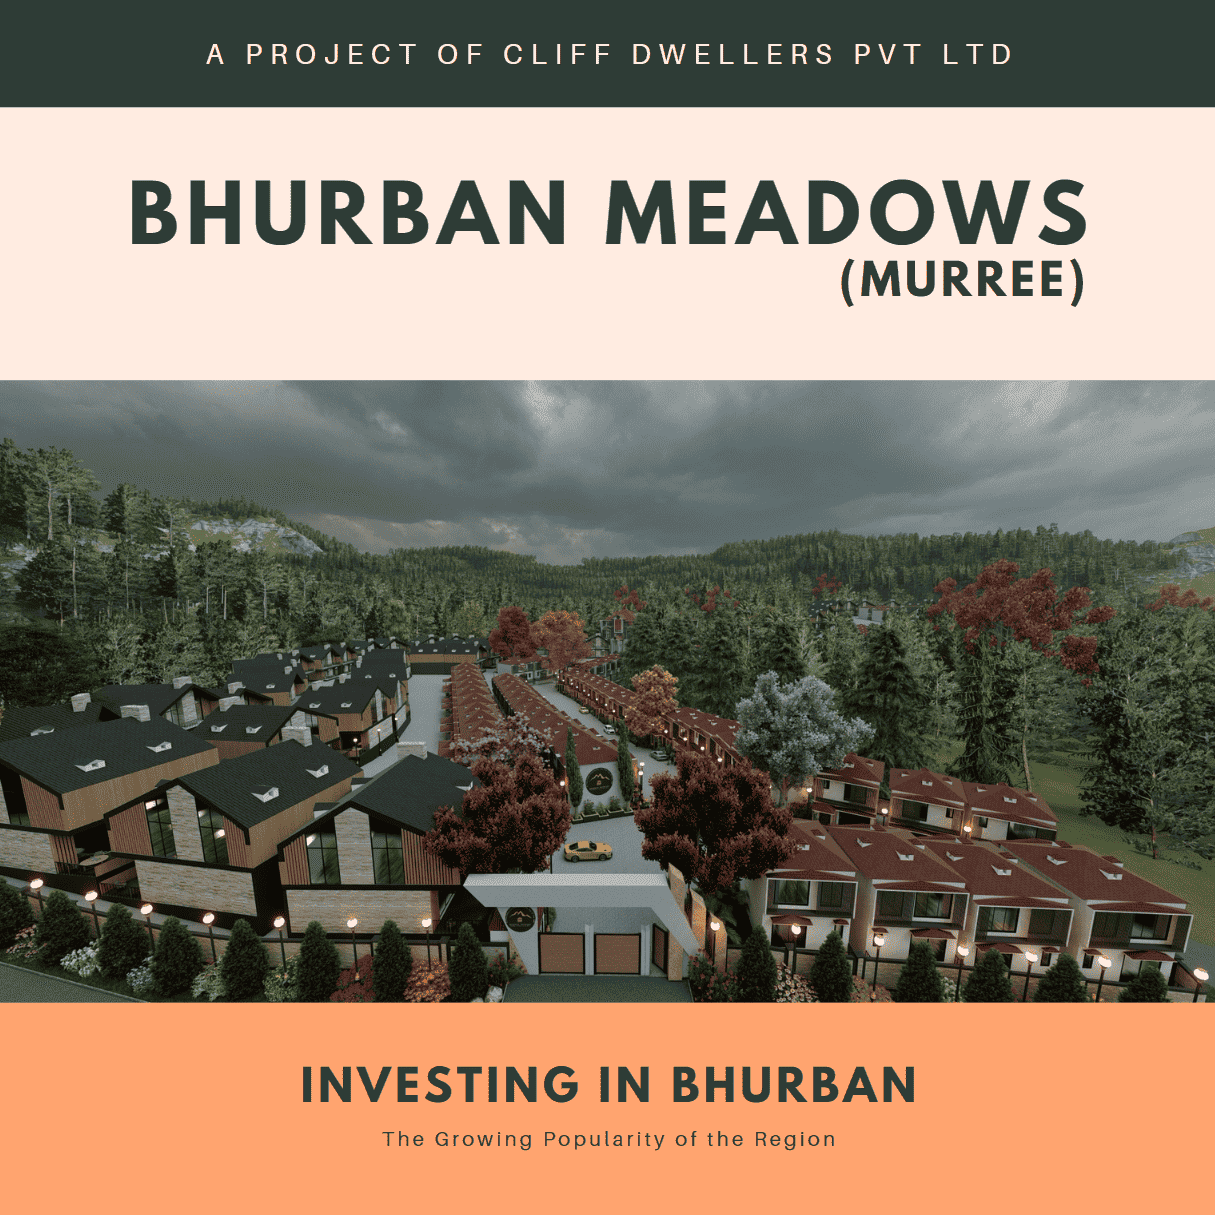 Investing in Bhurban: The Growing Popularity of the Region.